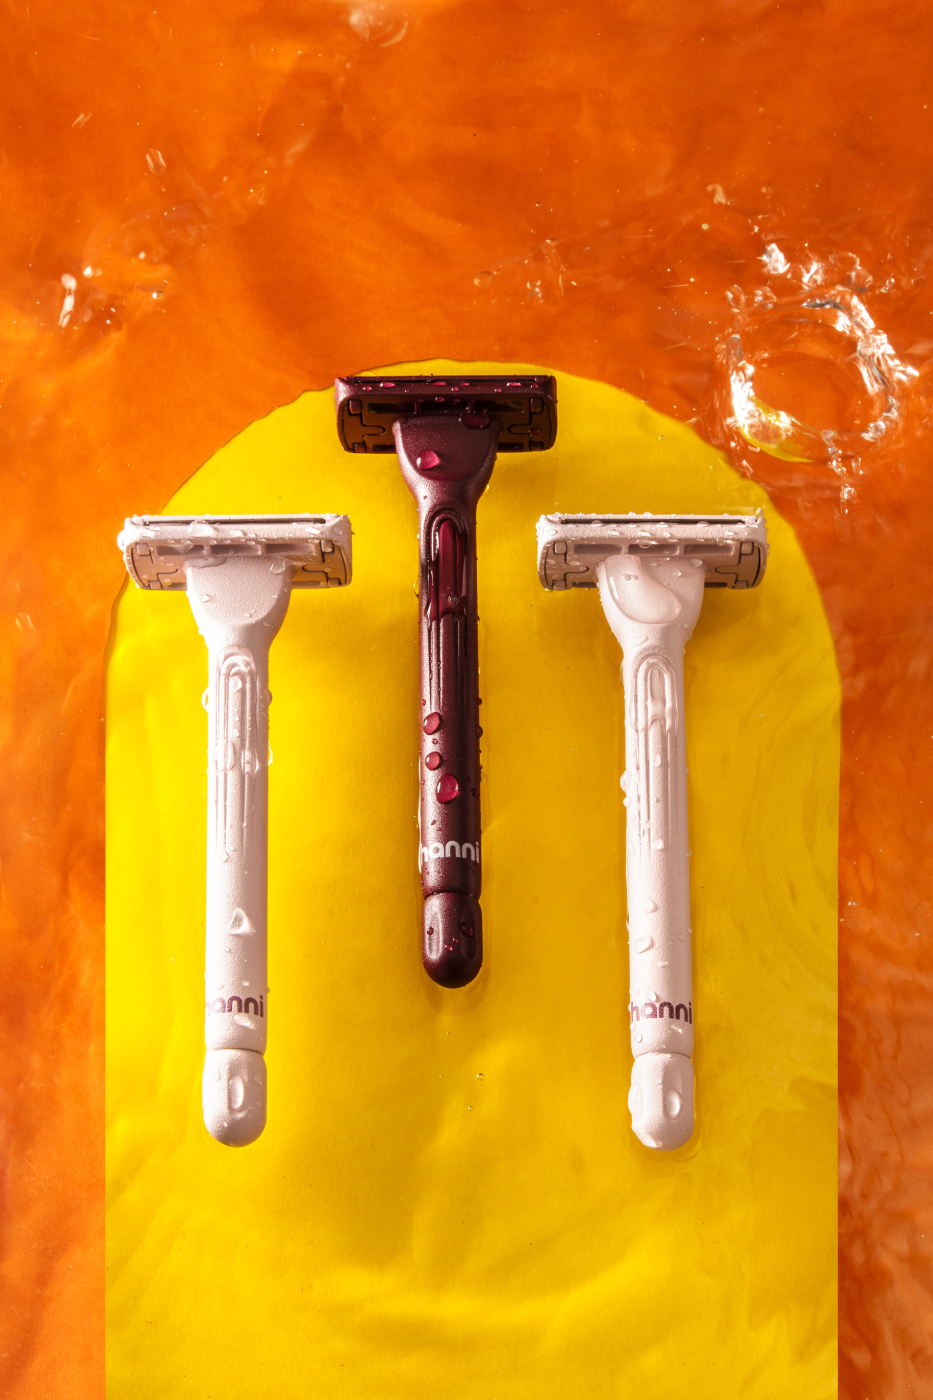 Three Hanni razors submerged in water with splashes on a orange background with a yellow arch shot by Katelin Kinney